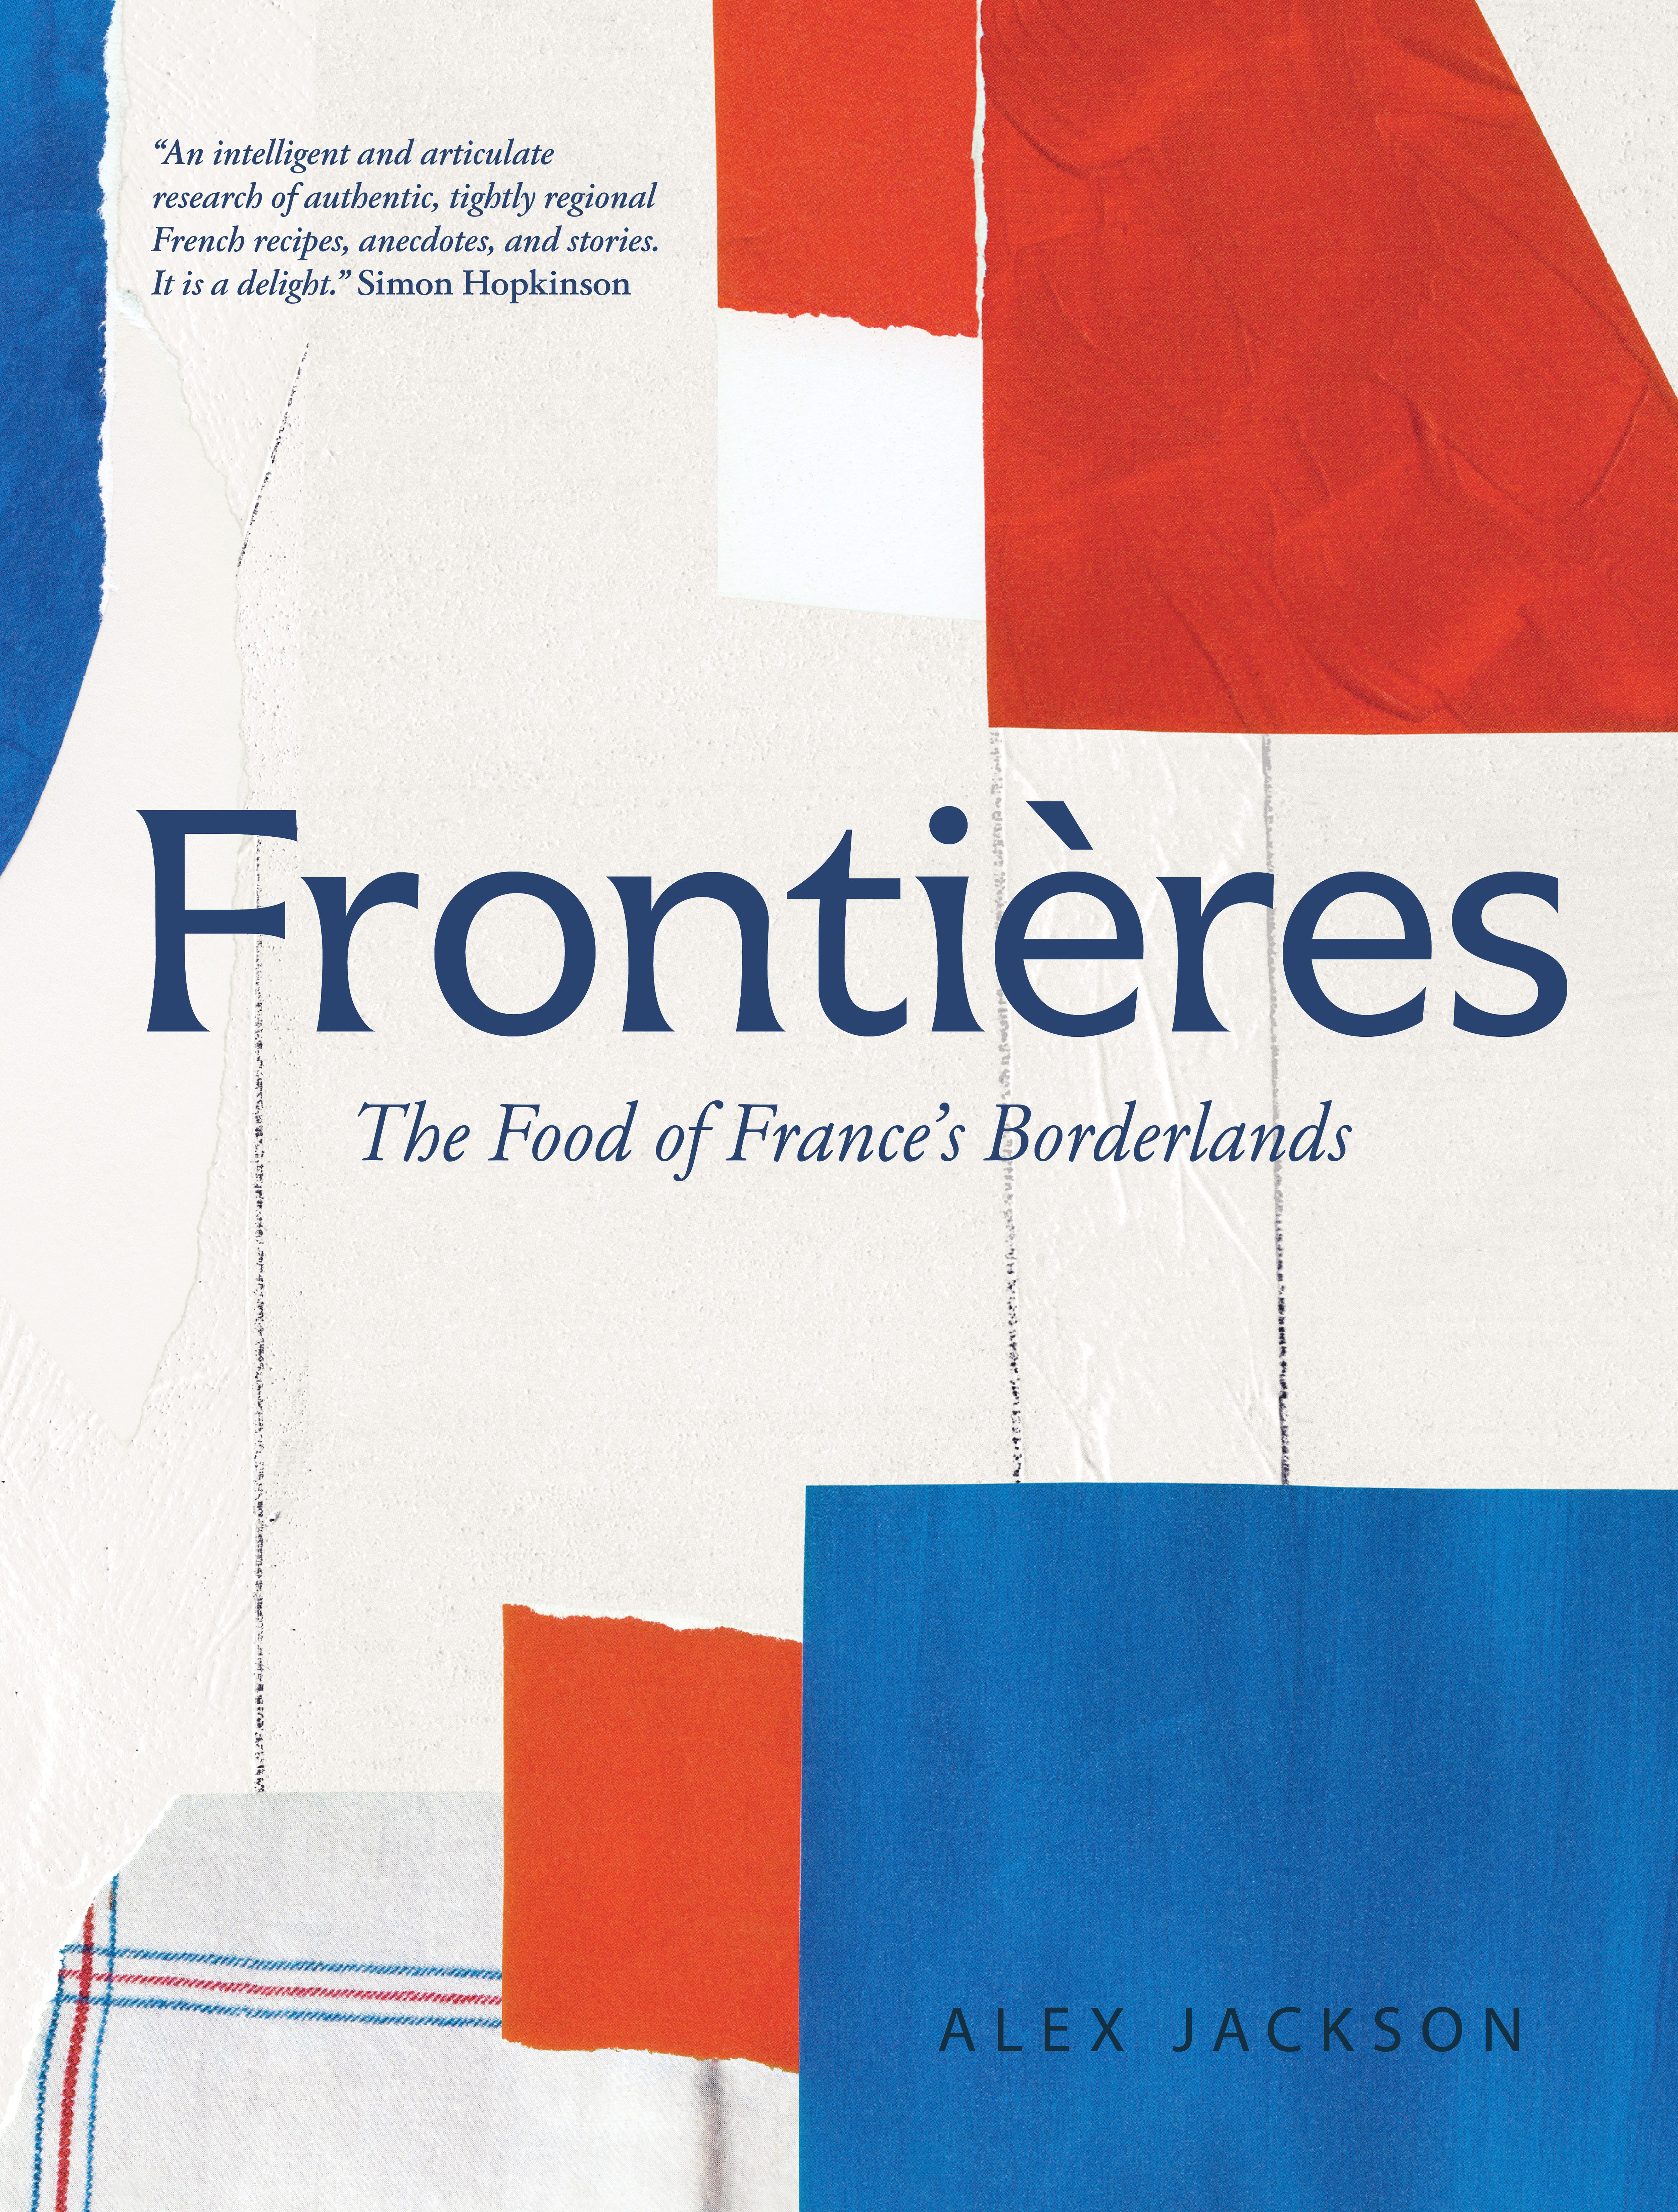 FrontiÃ¨res